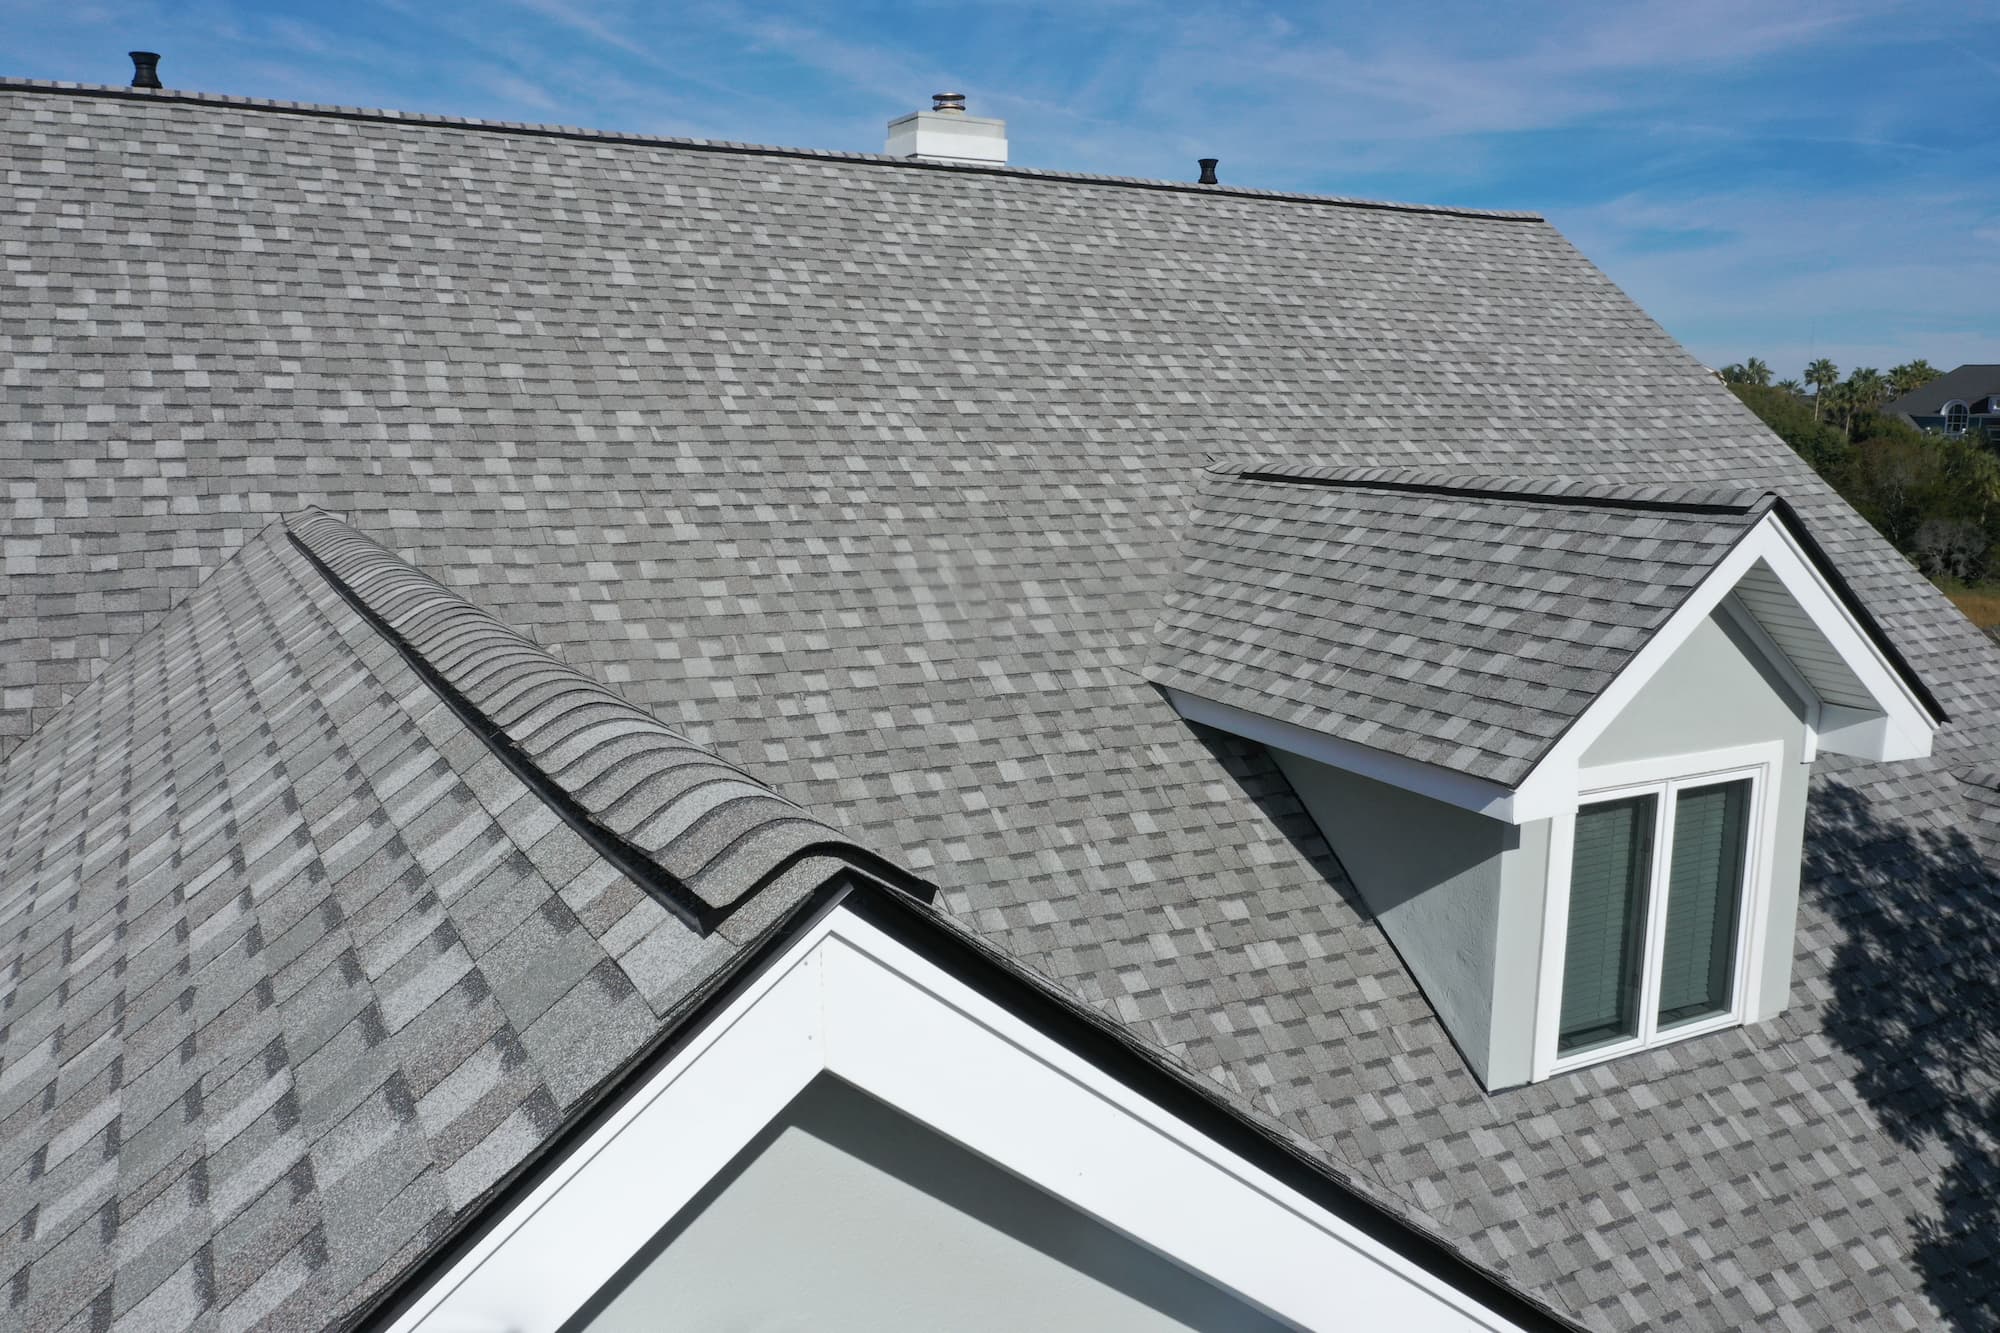 Daytime photo of new grey roof of a home